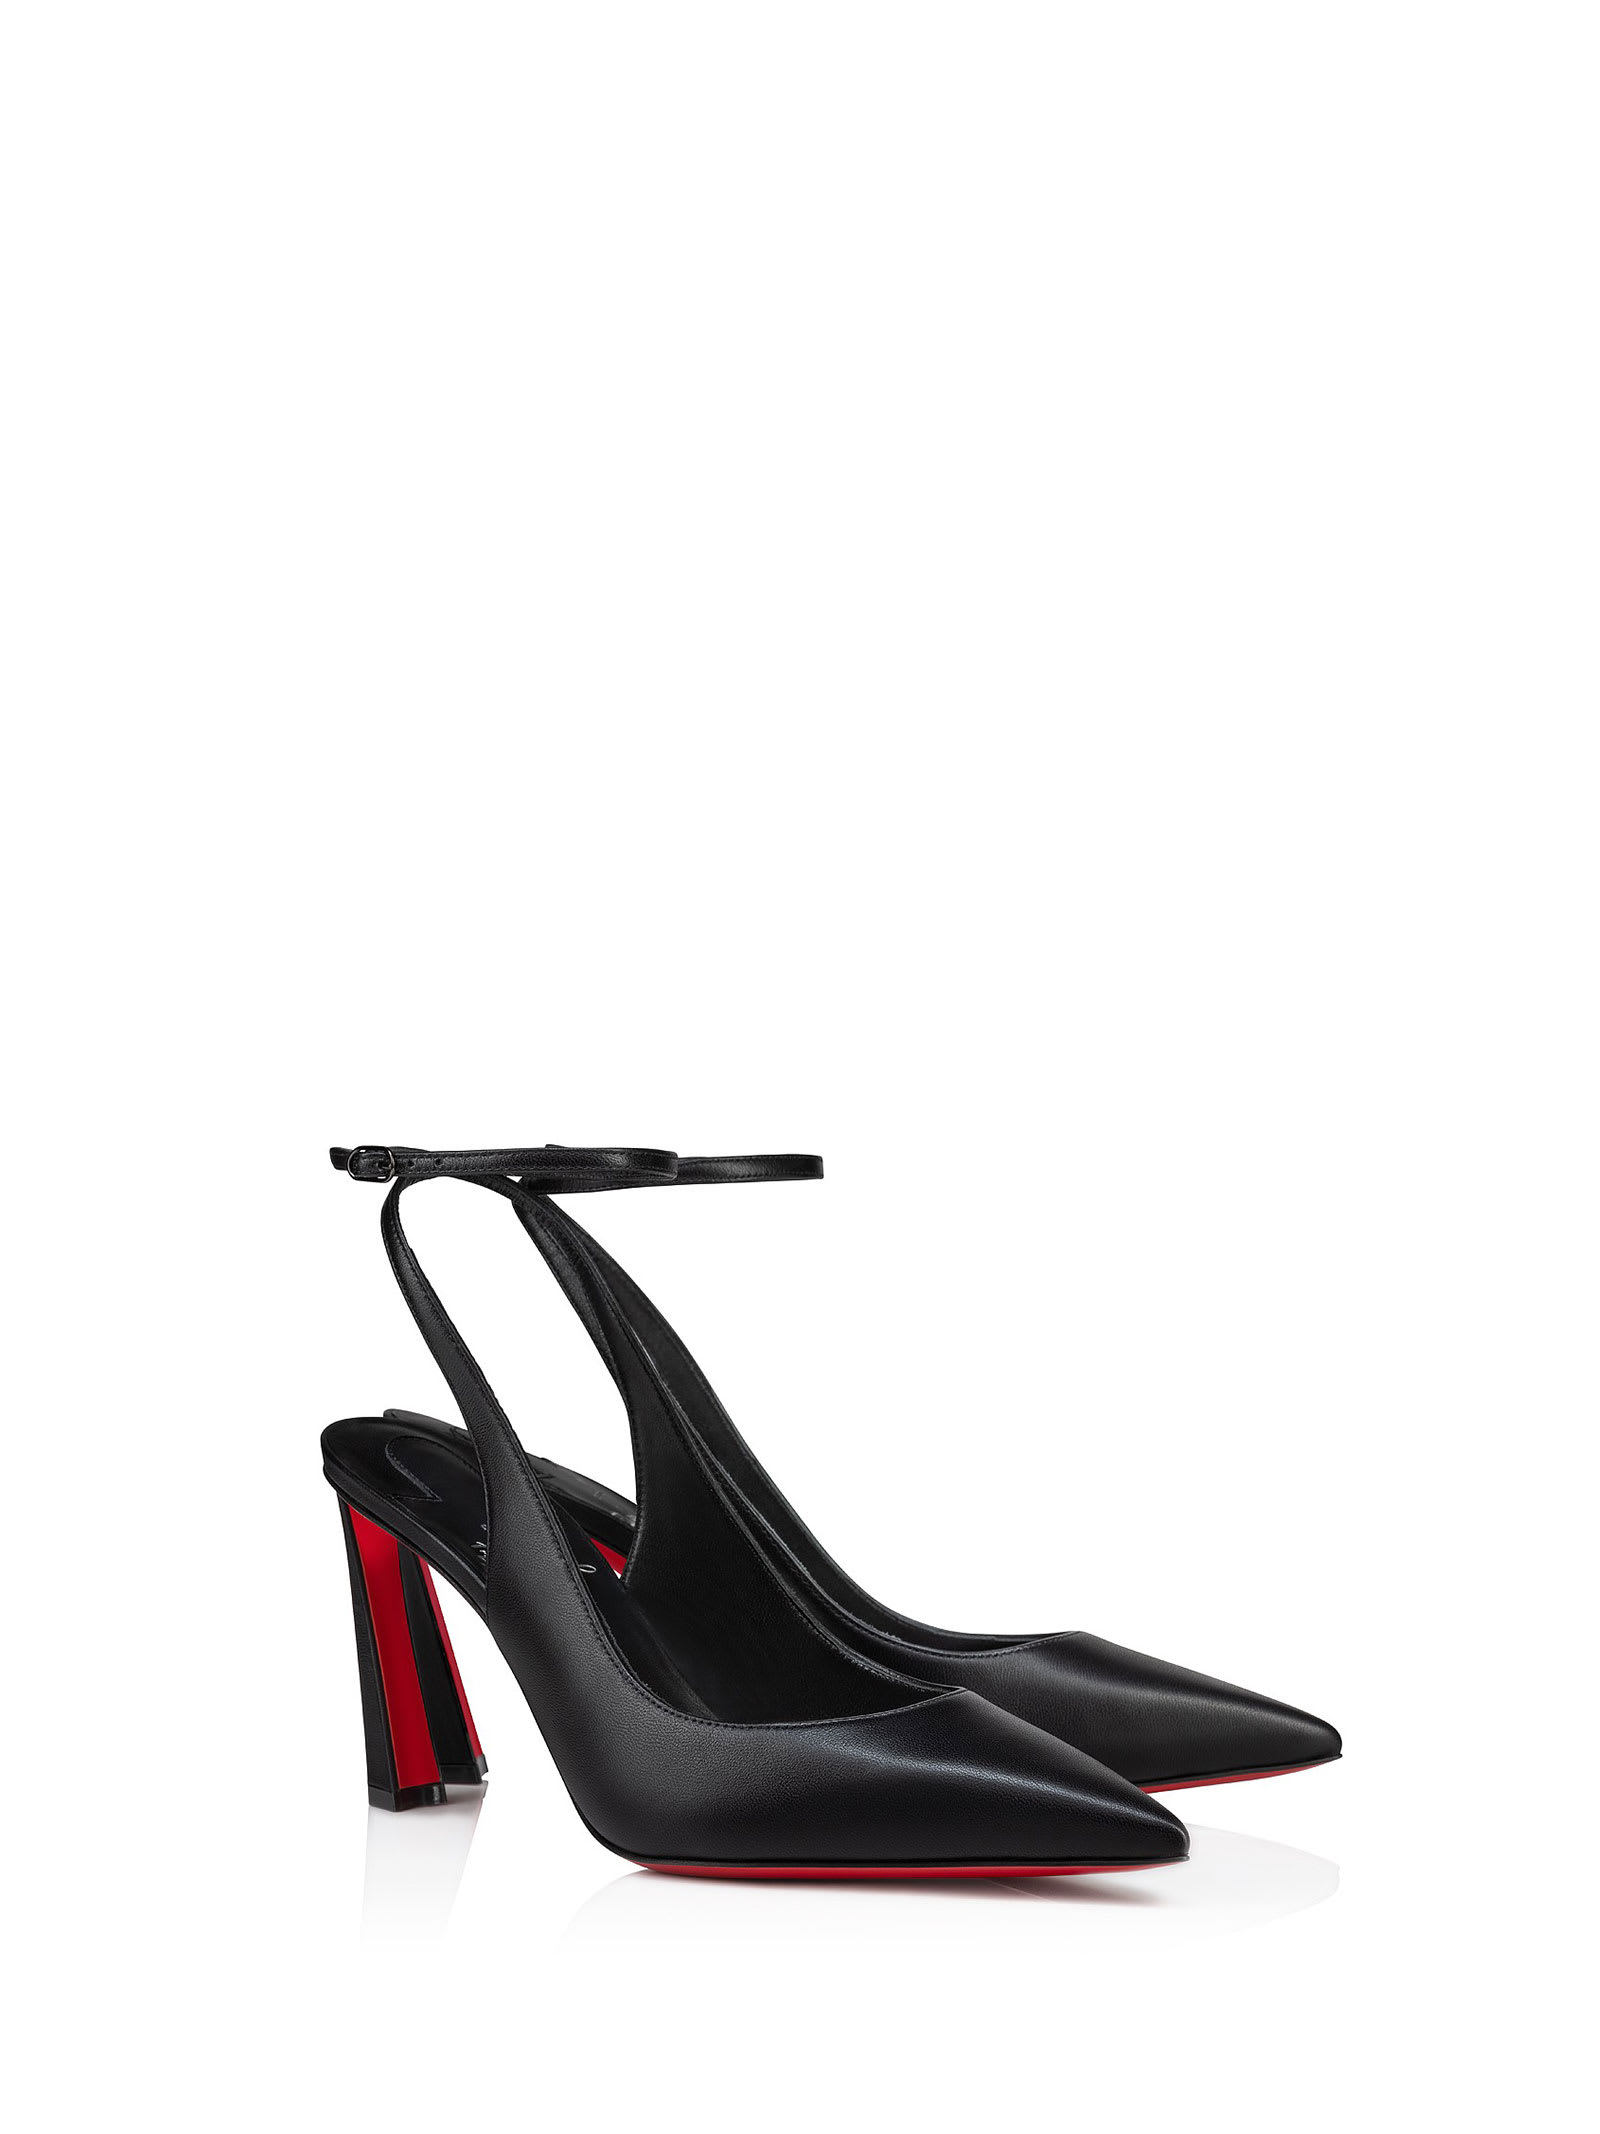 Shop Christian Louboutin Condora Strappy Pumps In Nappa Leather In Black